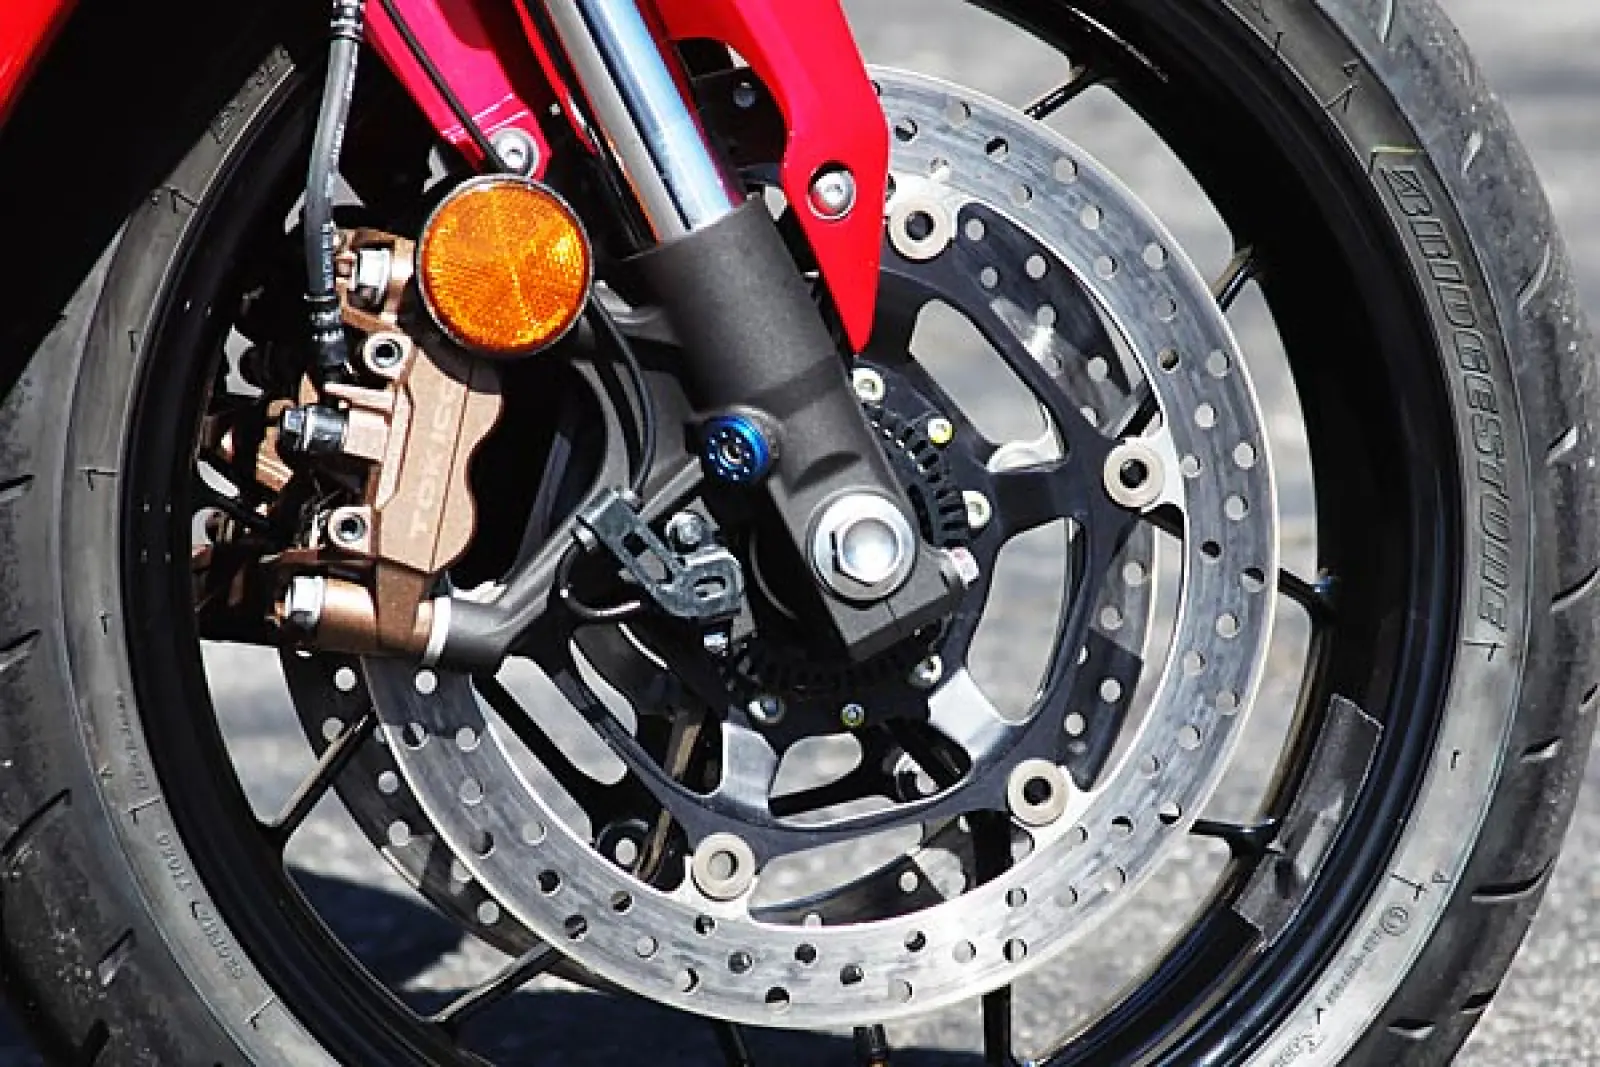 Know the difference between ABS and non-ABS bike, what provides safety, know everything